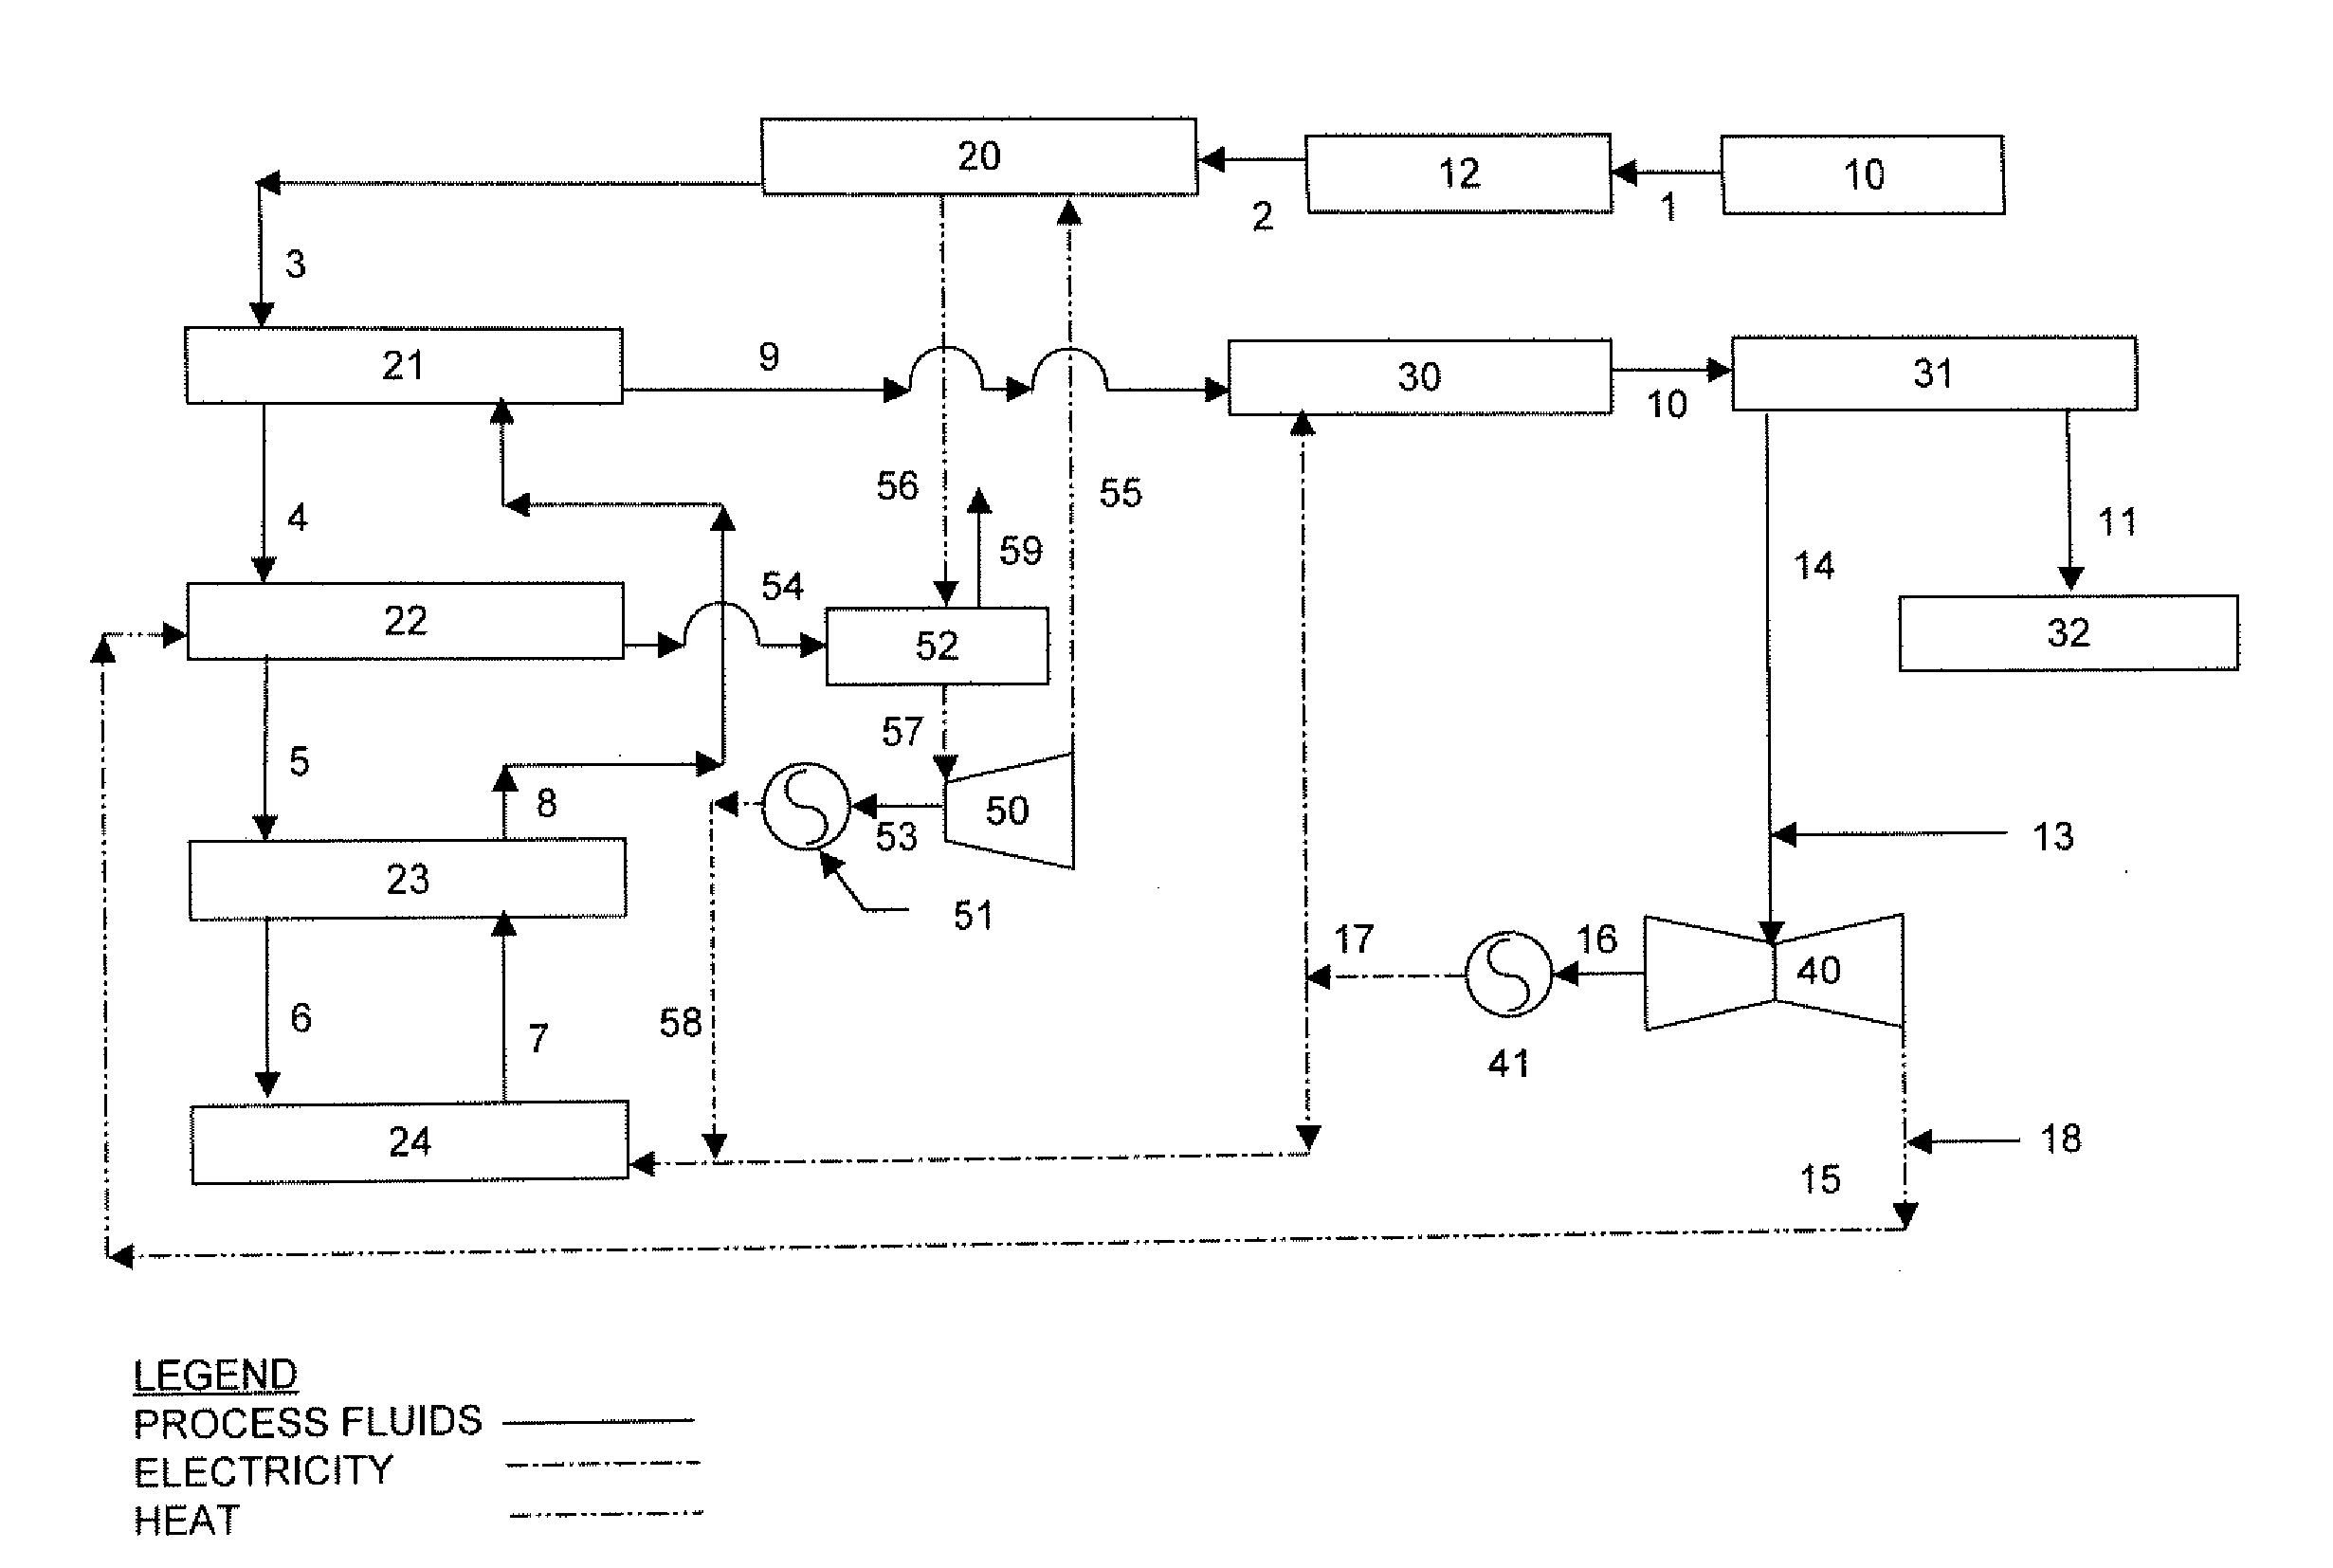 Manufacture of fuels by a co-generation cycle